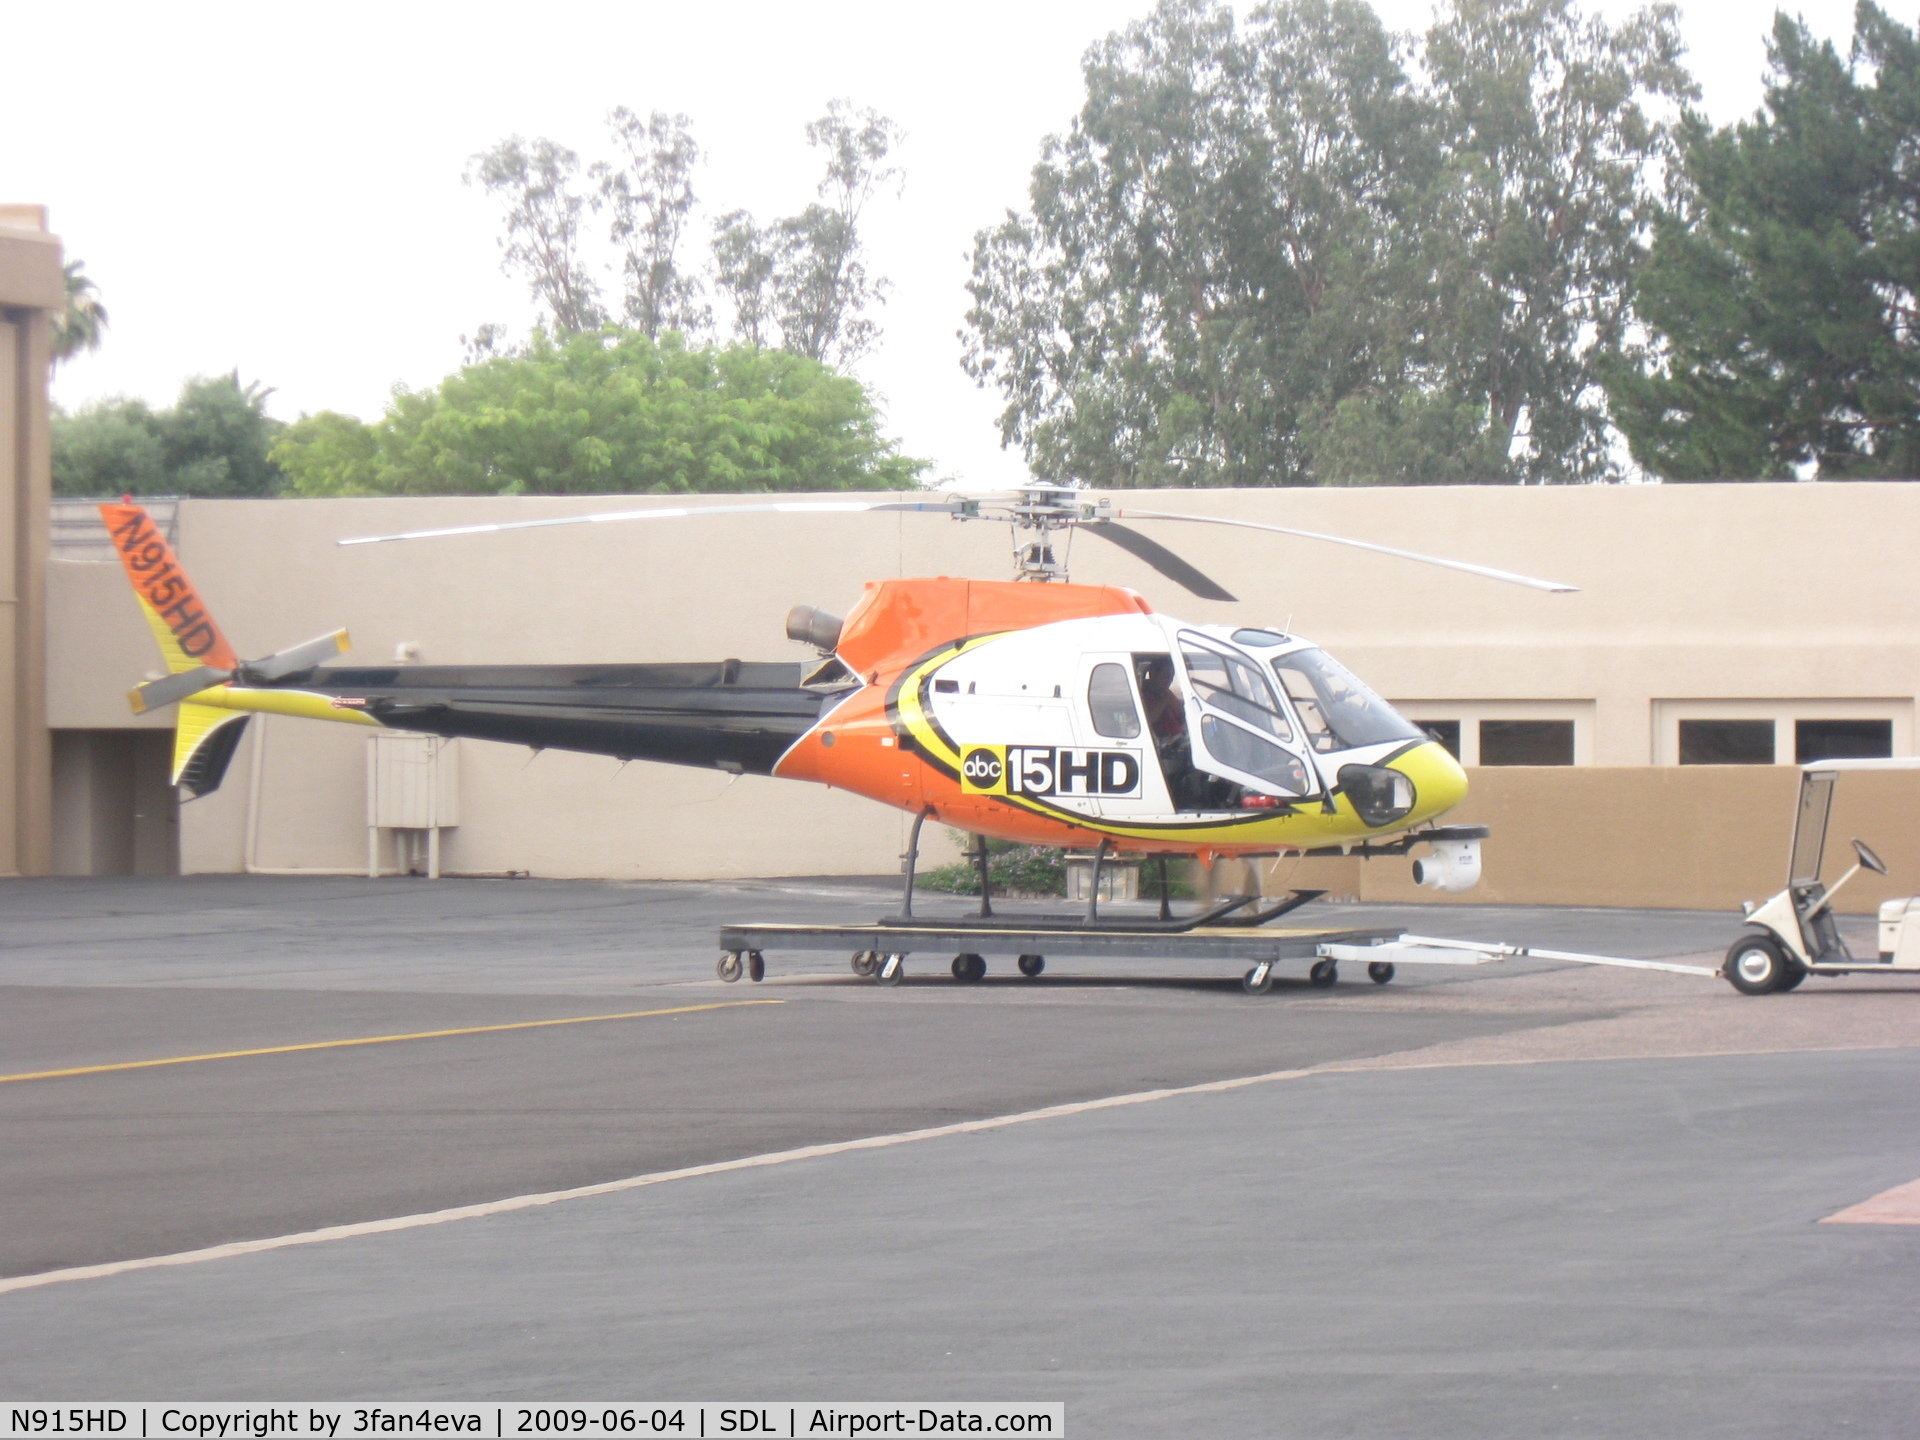 N915HD, 2002 Eurocopter AS-350B-2 Ecureuil Ecureuil C/N 3583, KNXV Helicopter Departing from Hanger @ Scottsdale Airpark